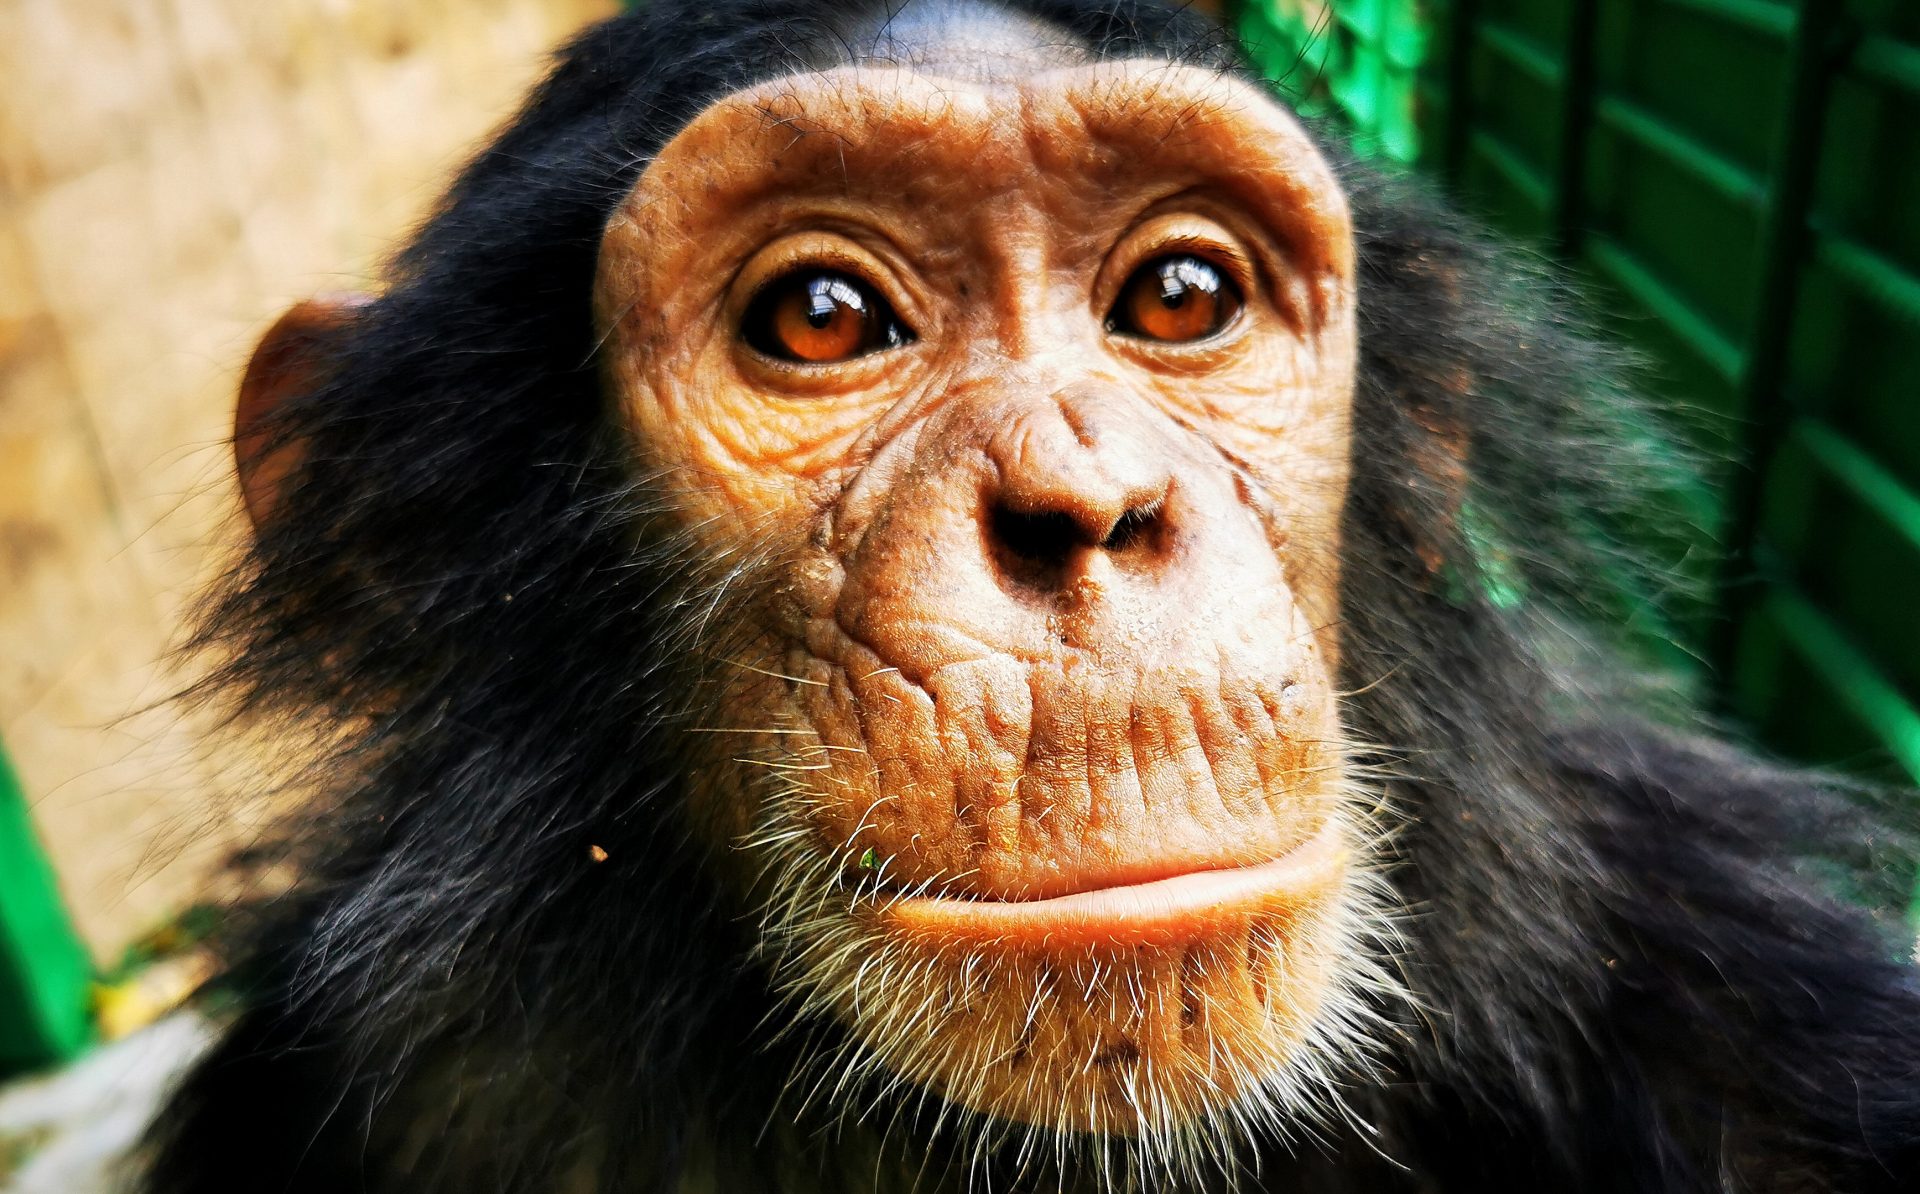 a new life for Elia, the bird cage chimp